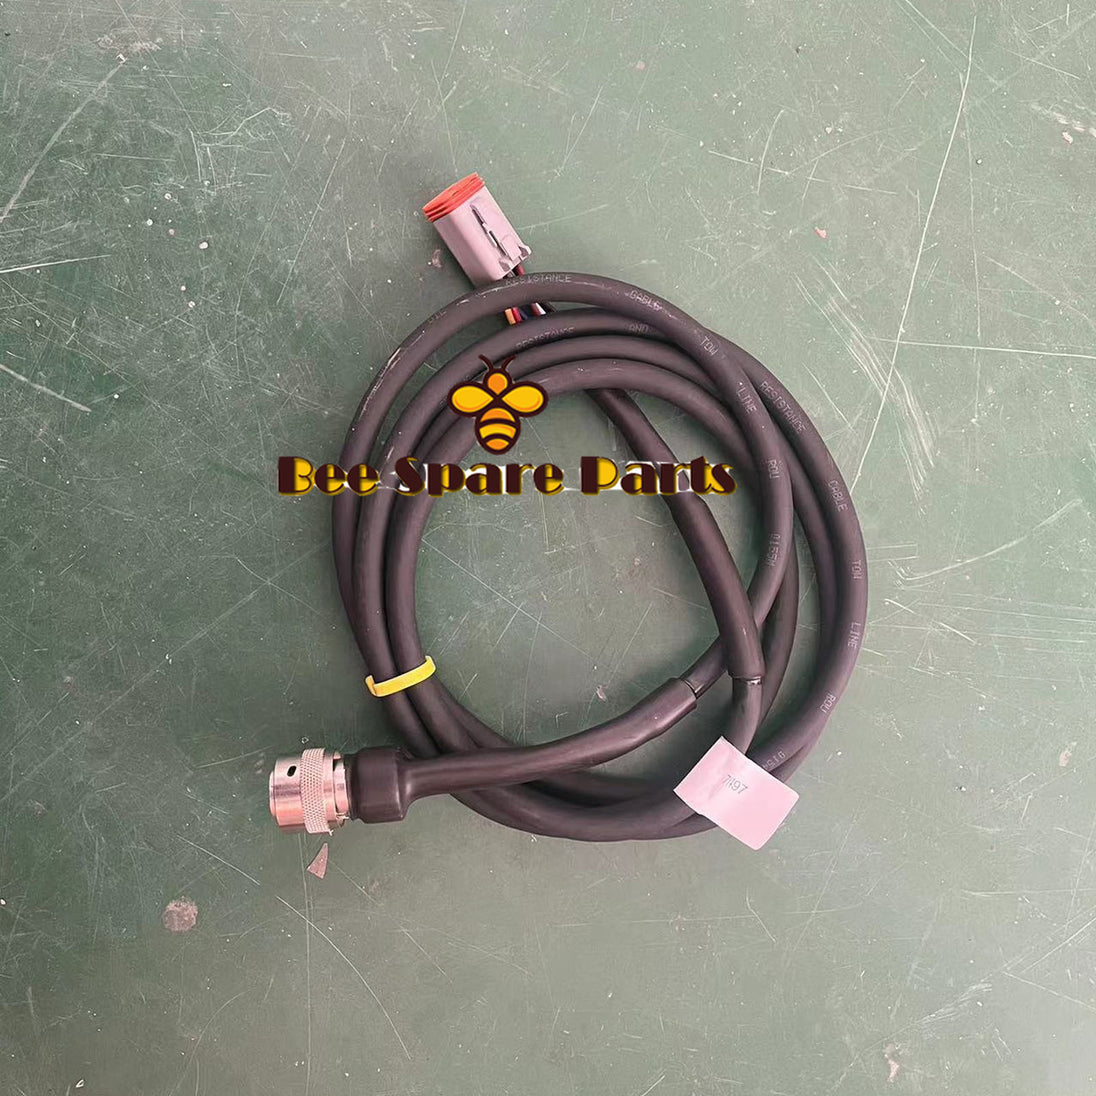 7-Pin Input Harness 7150497 Harness Cable Connector for Bobcat S770 Skid Steer Loader